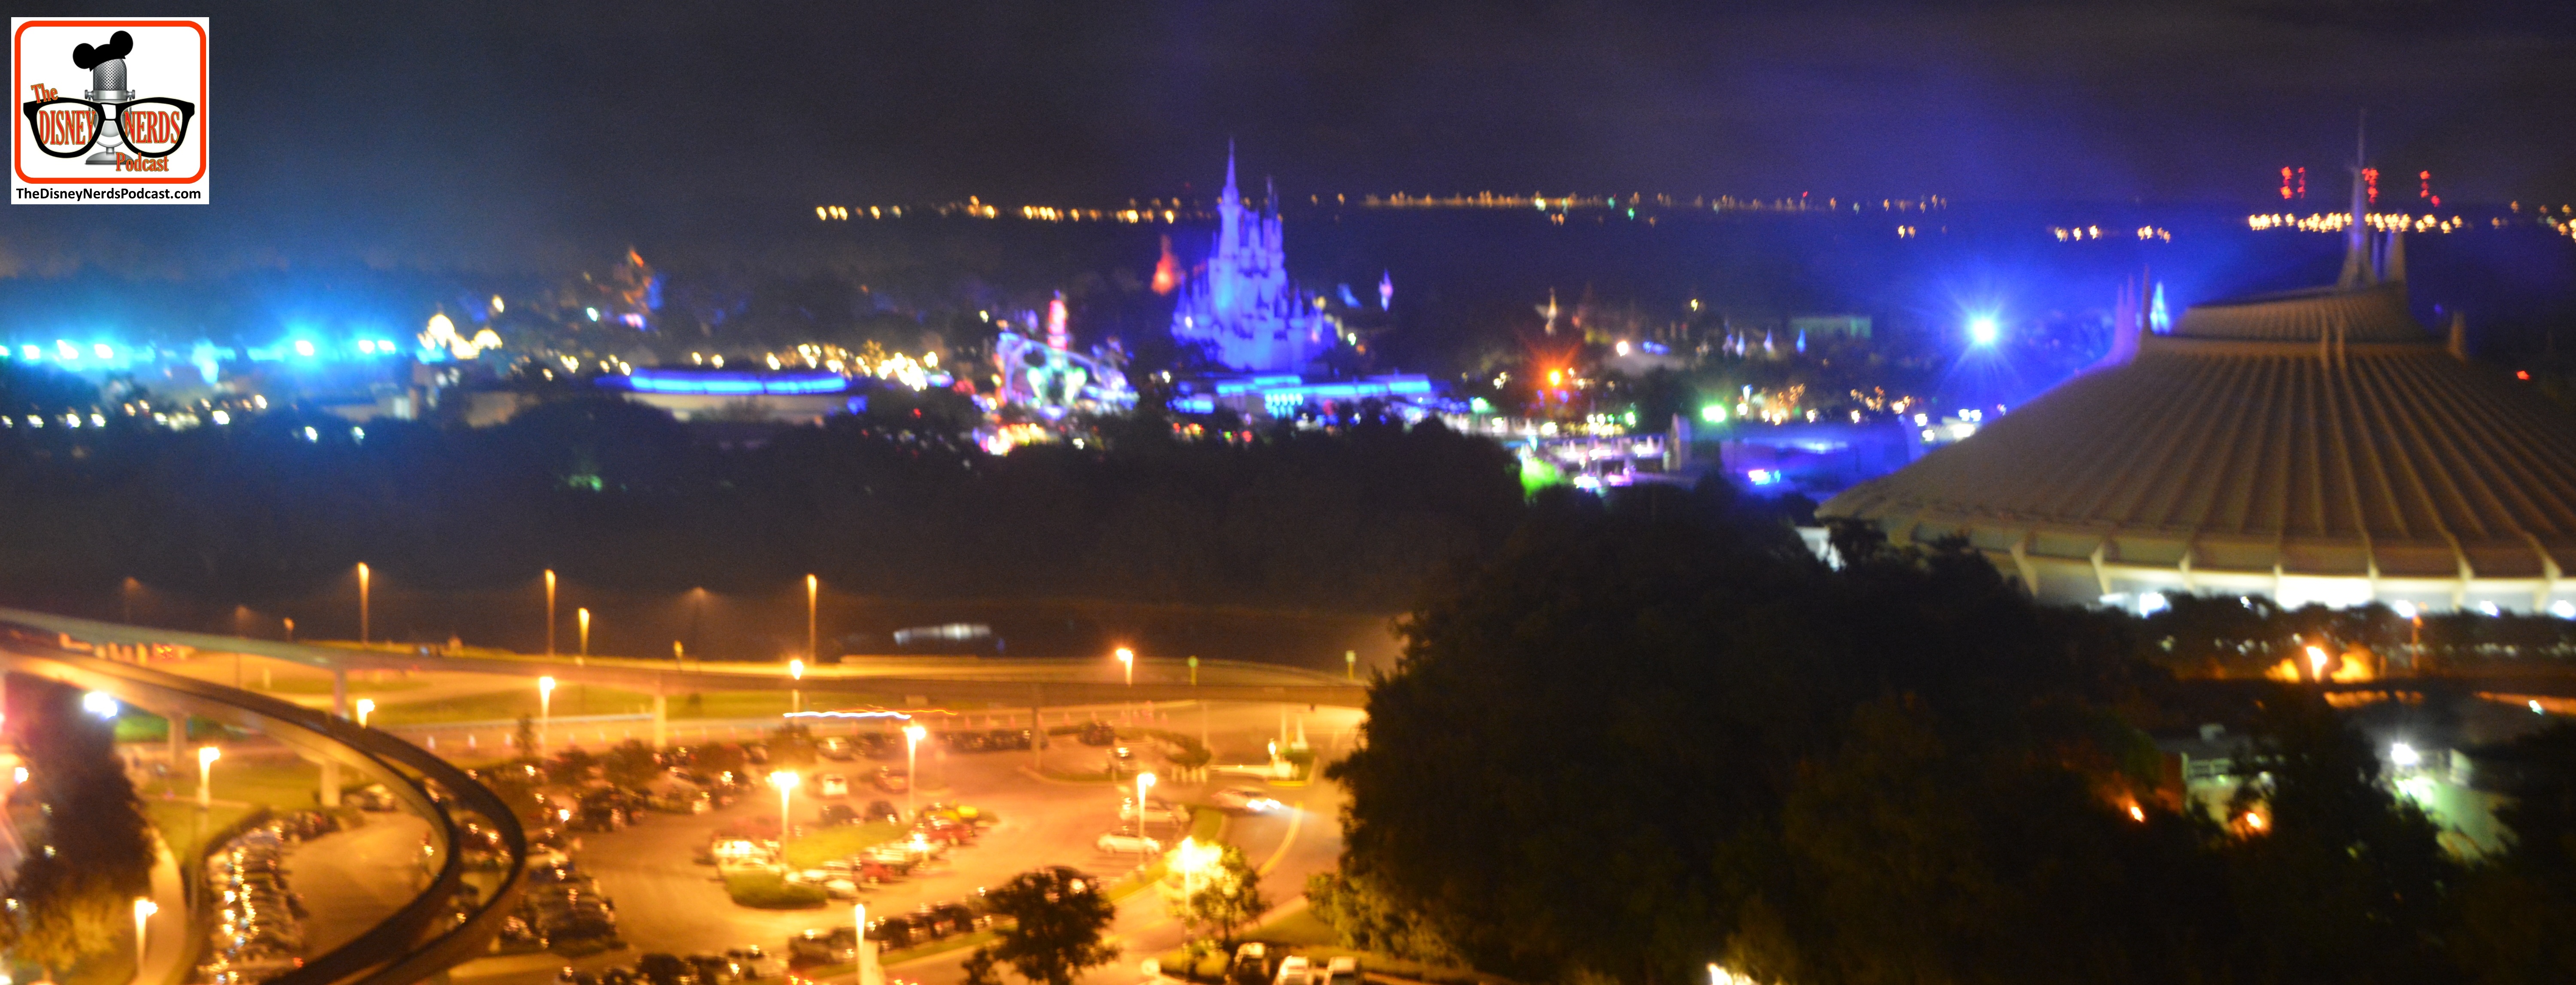 A few of the Magic Kingdom from Bay Lake Tower.